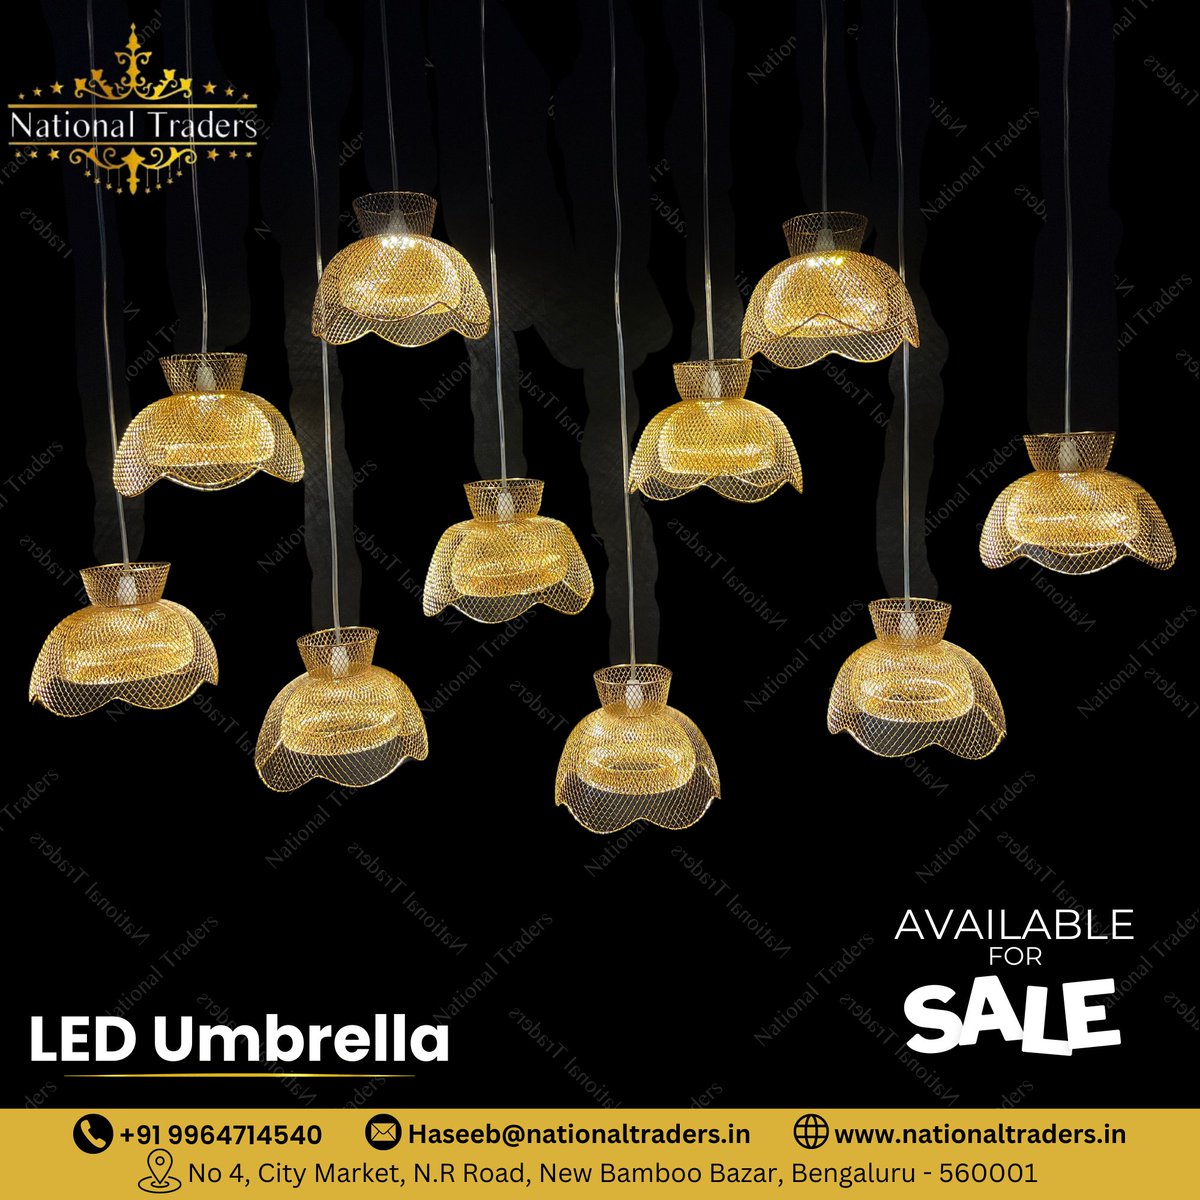 LED Umbrella available for sale! Connect with National Traders for all your decorative items requirements.

𝐊𝐧𝐨𝐰 𝐦𝐨𝐫𝐞:
𝐂𝐚𝐥𝐥: +𝟗𝟏 𝟗𝟗𝟔𝟒𝟕𝟏𝟒𝟓𝟒𝟎
𝐕𝐢𝐬𝐢𝐭: nationaltraders.in

#nationaltraders #ledumbrella #decor #weddingdecor #hangings #hangingdecor